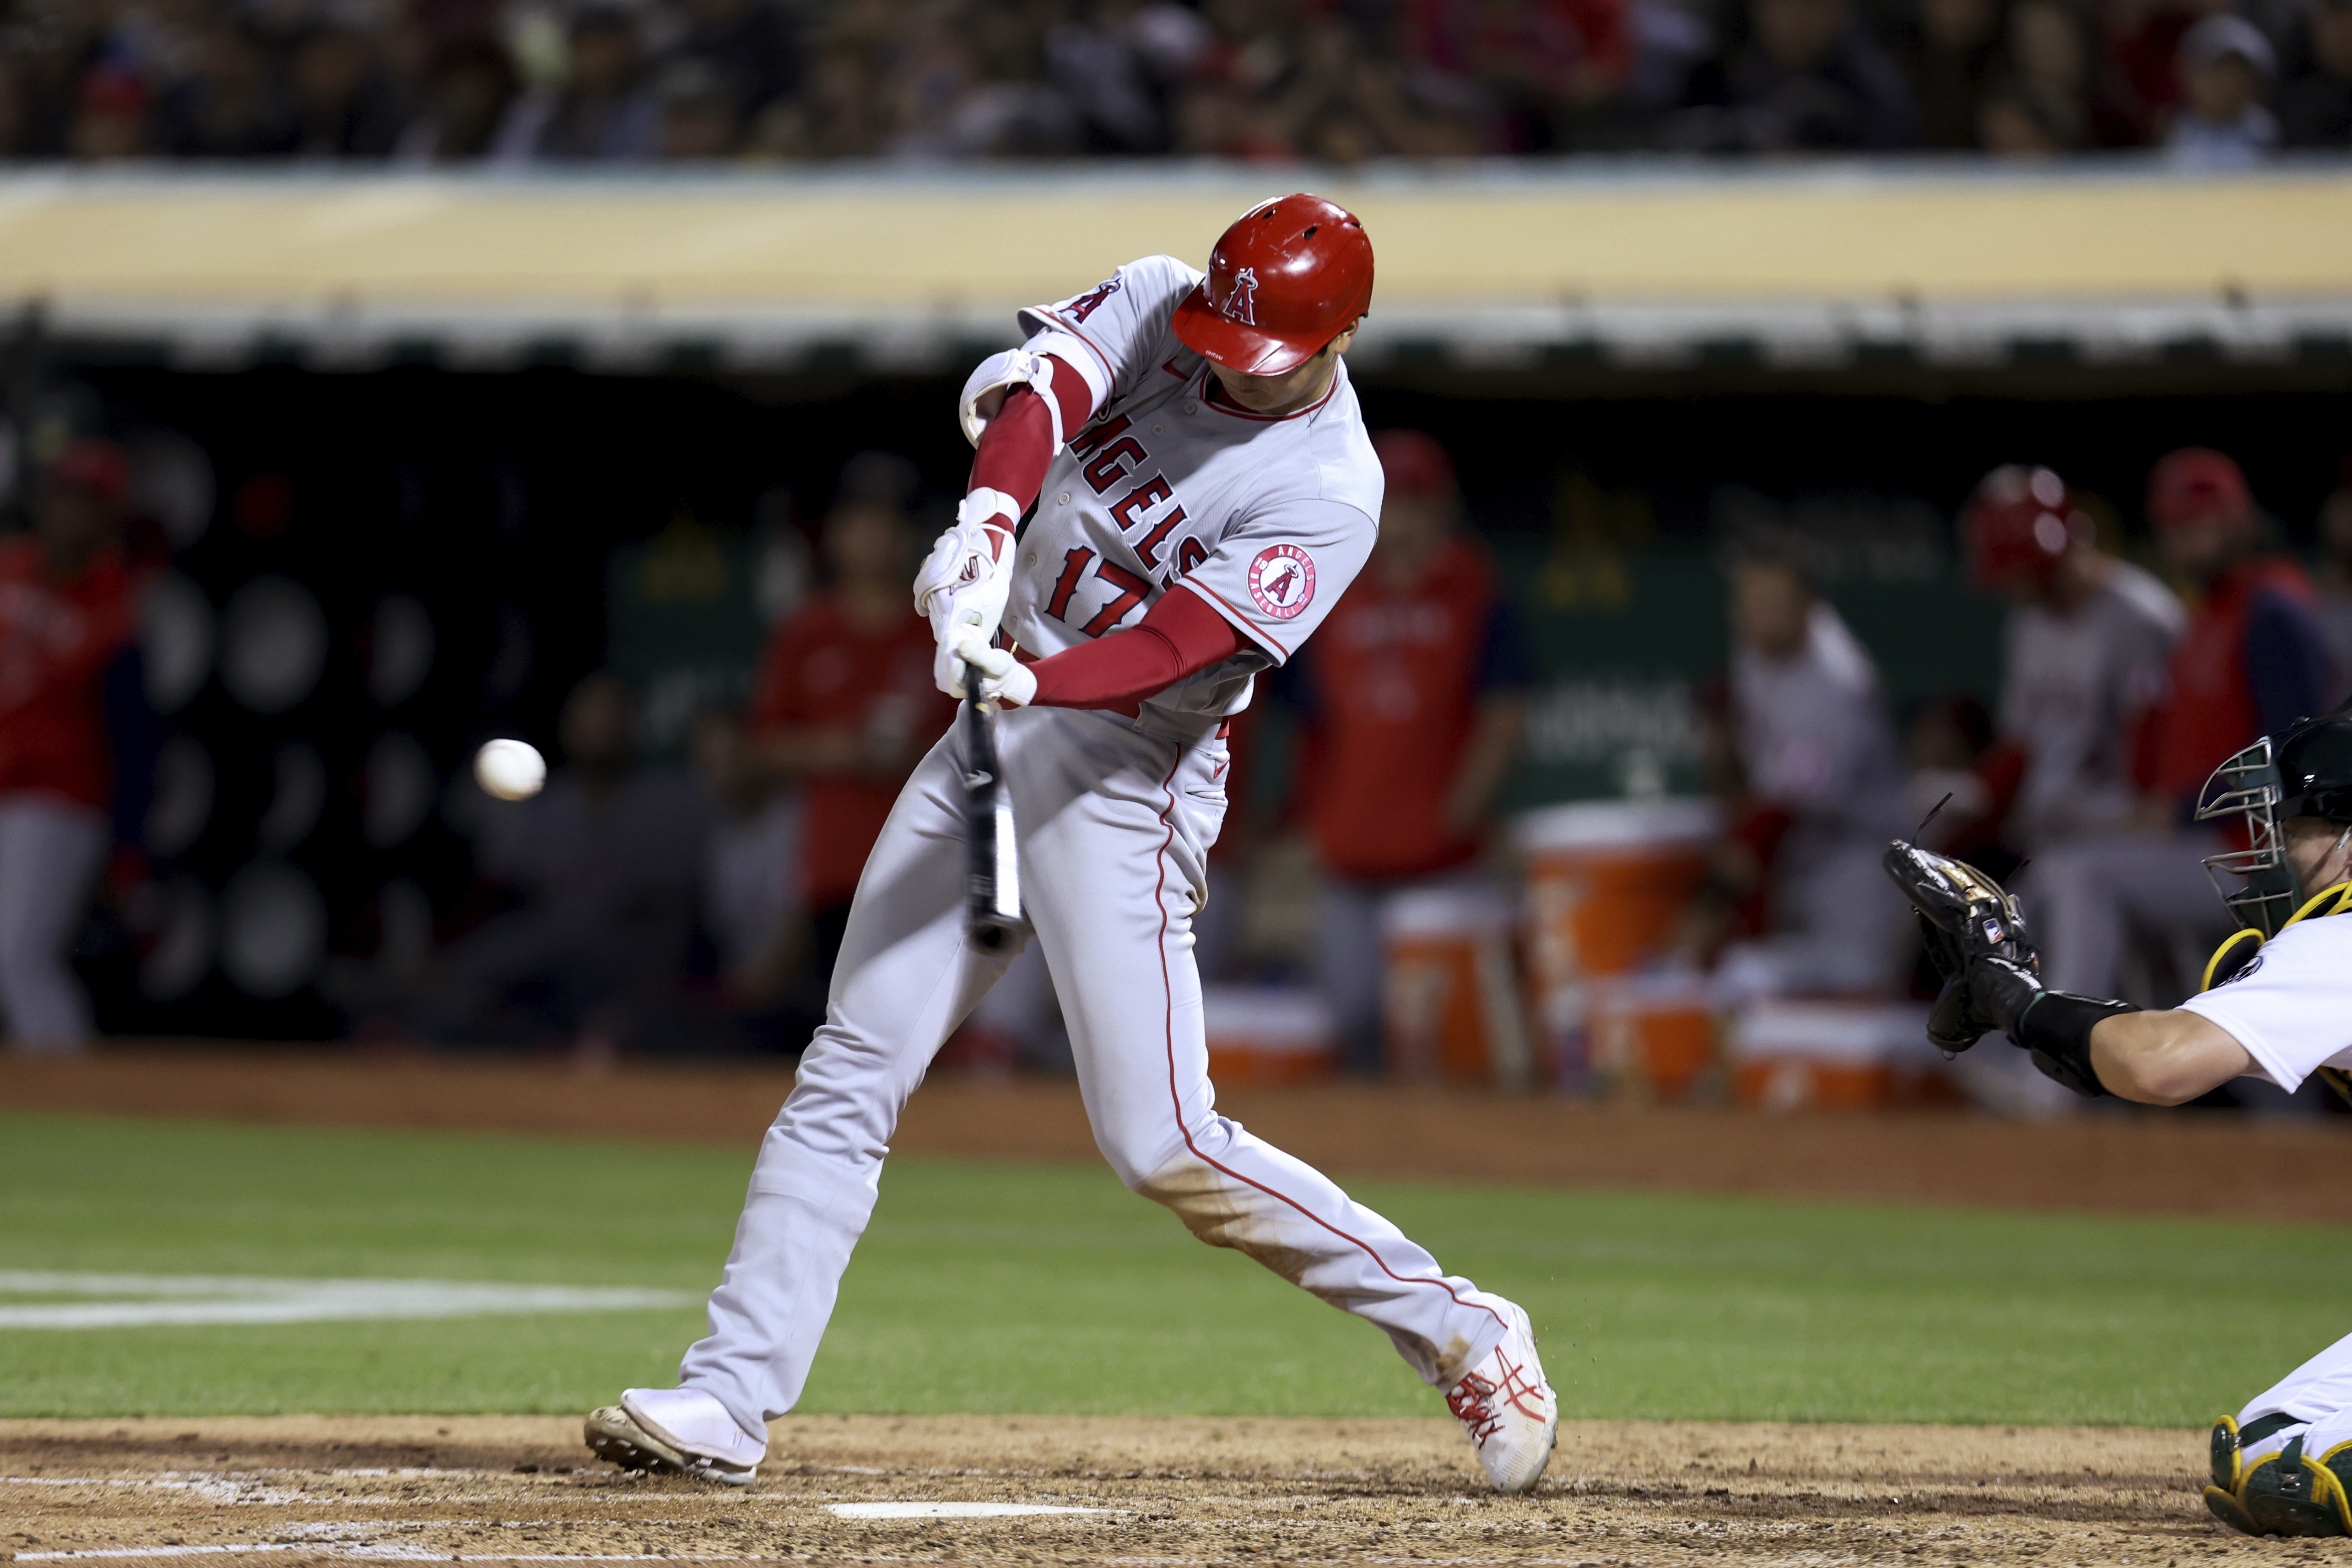 Los Angeles Angels' Shohei Ohtani Continues to Rewrite Baseball History  Books on Friday - Fastball